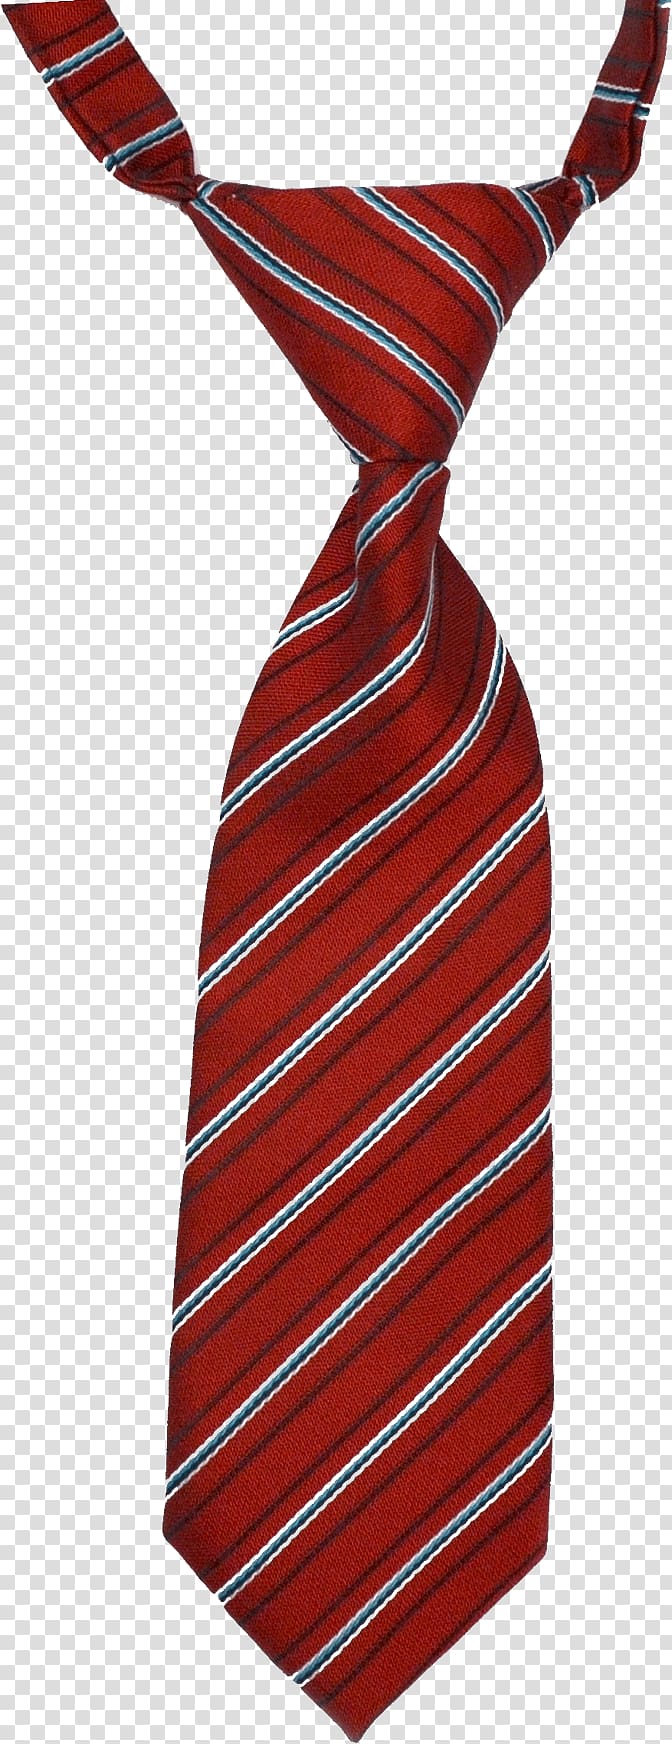 red and blue striped necktie, Stripes Tie transparent background PNG clipart